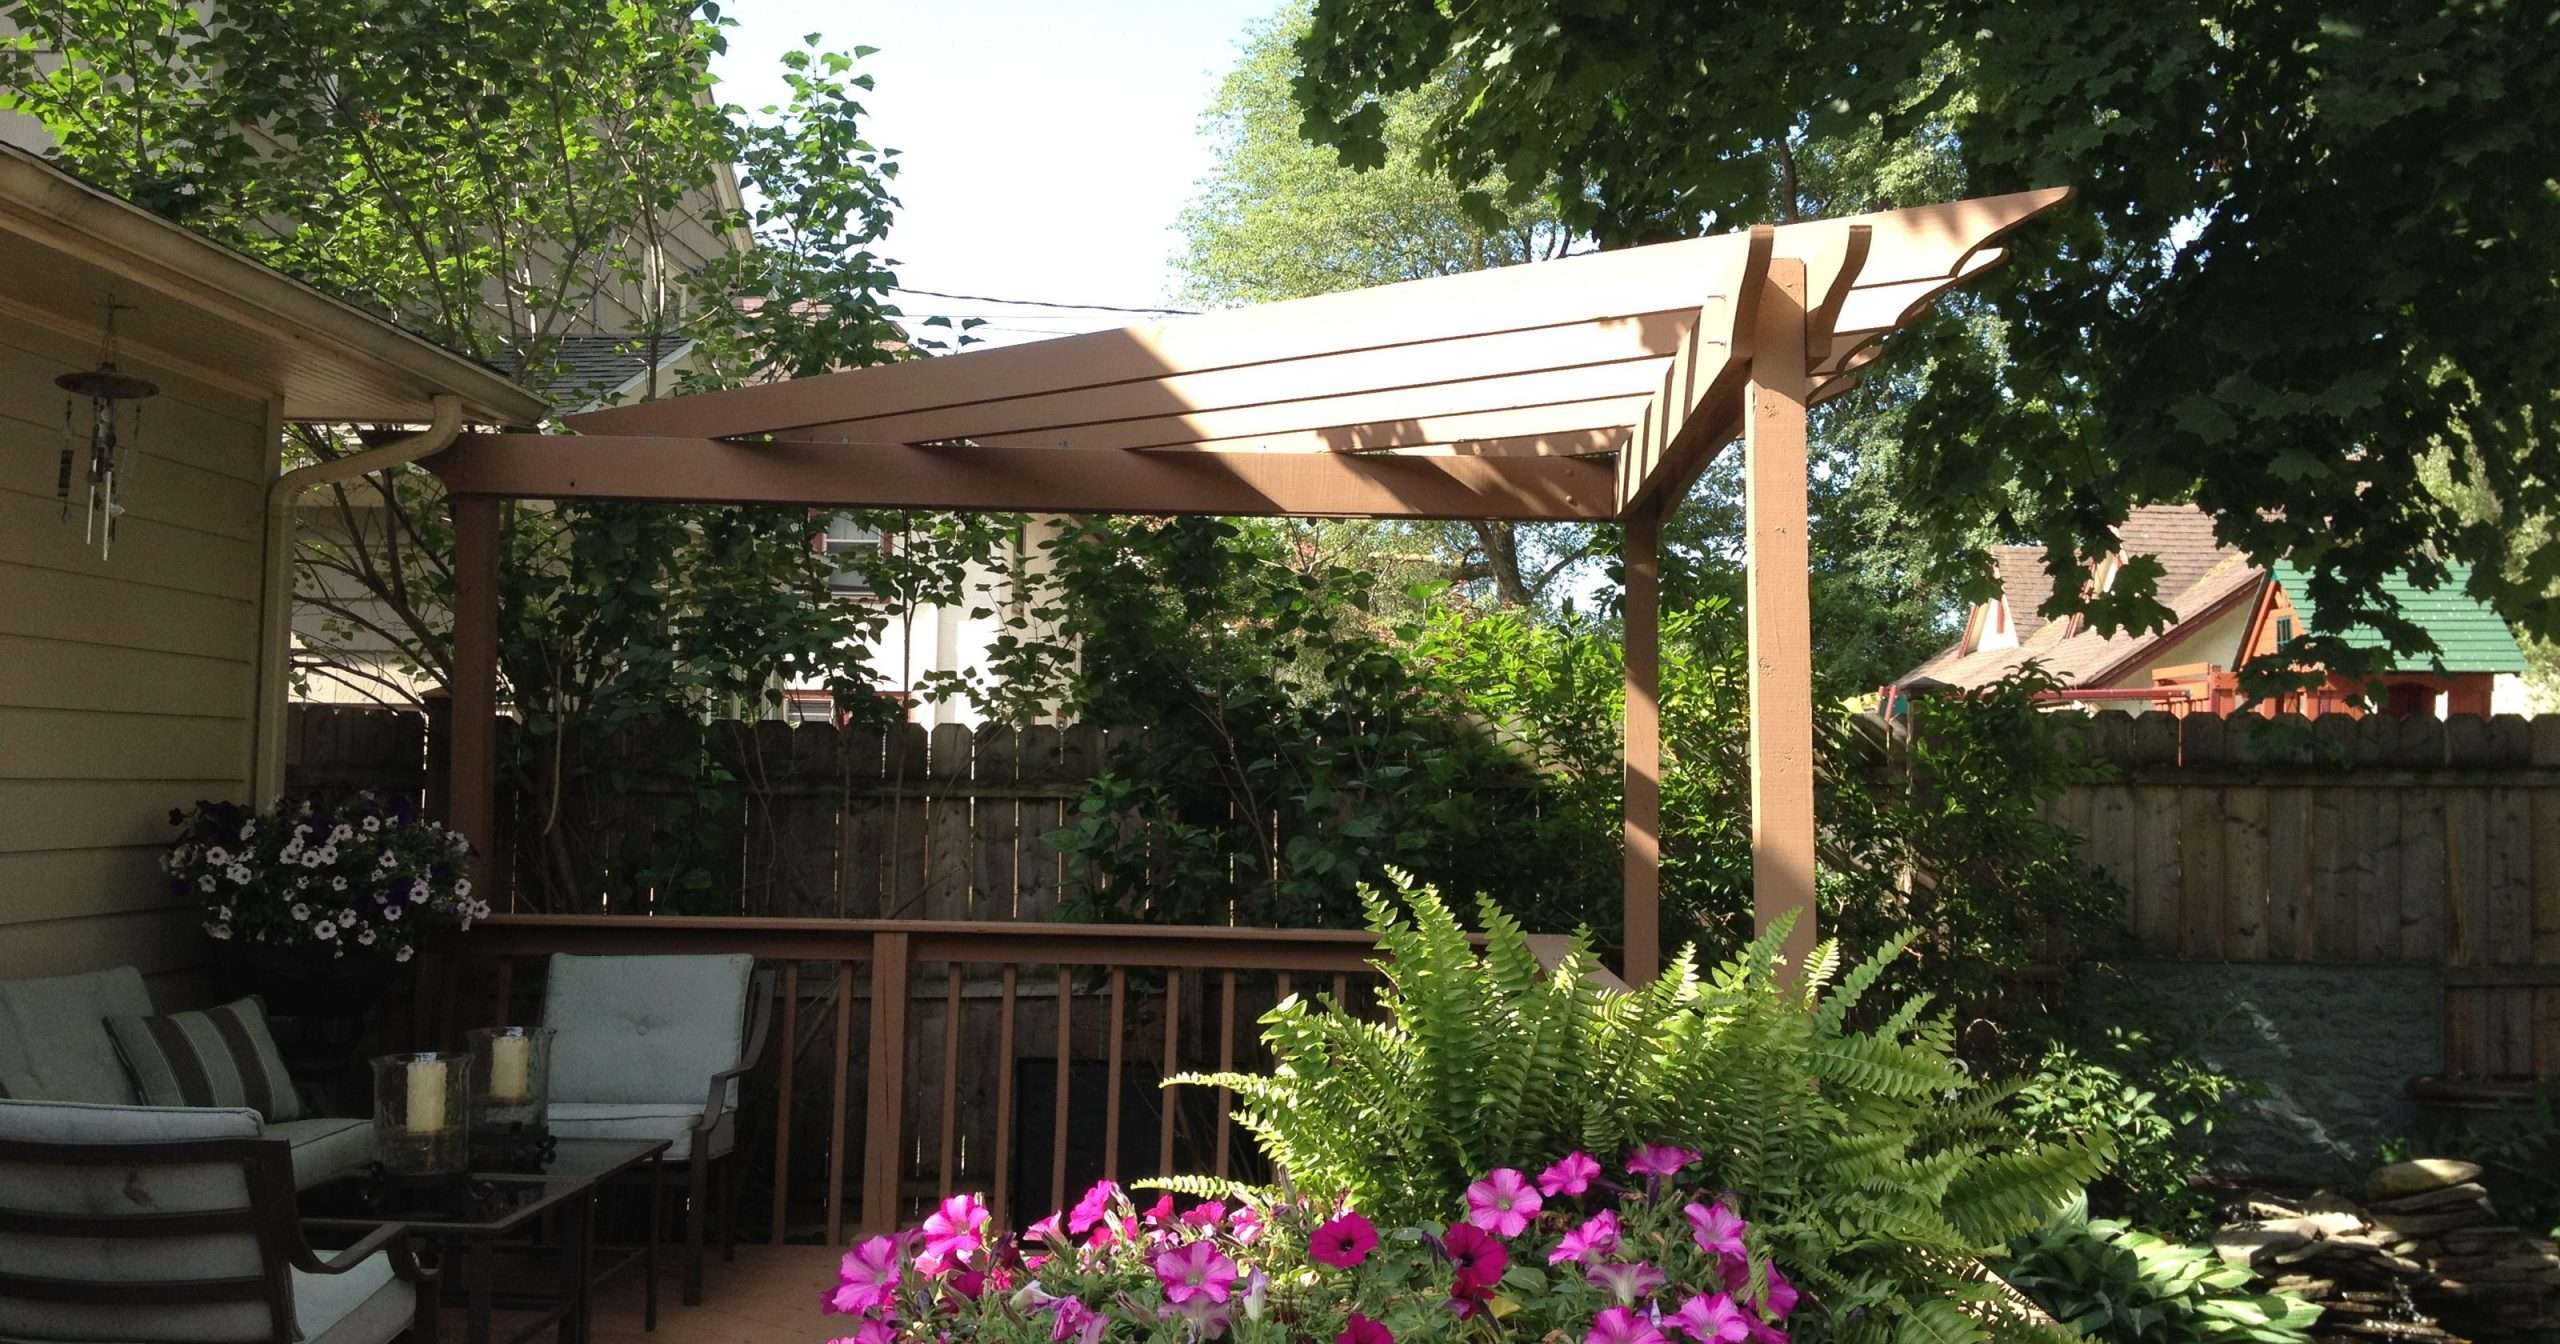 Add some shade with a DIY pergola